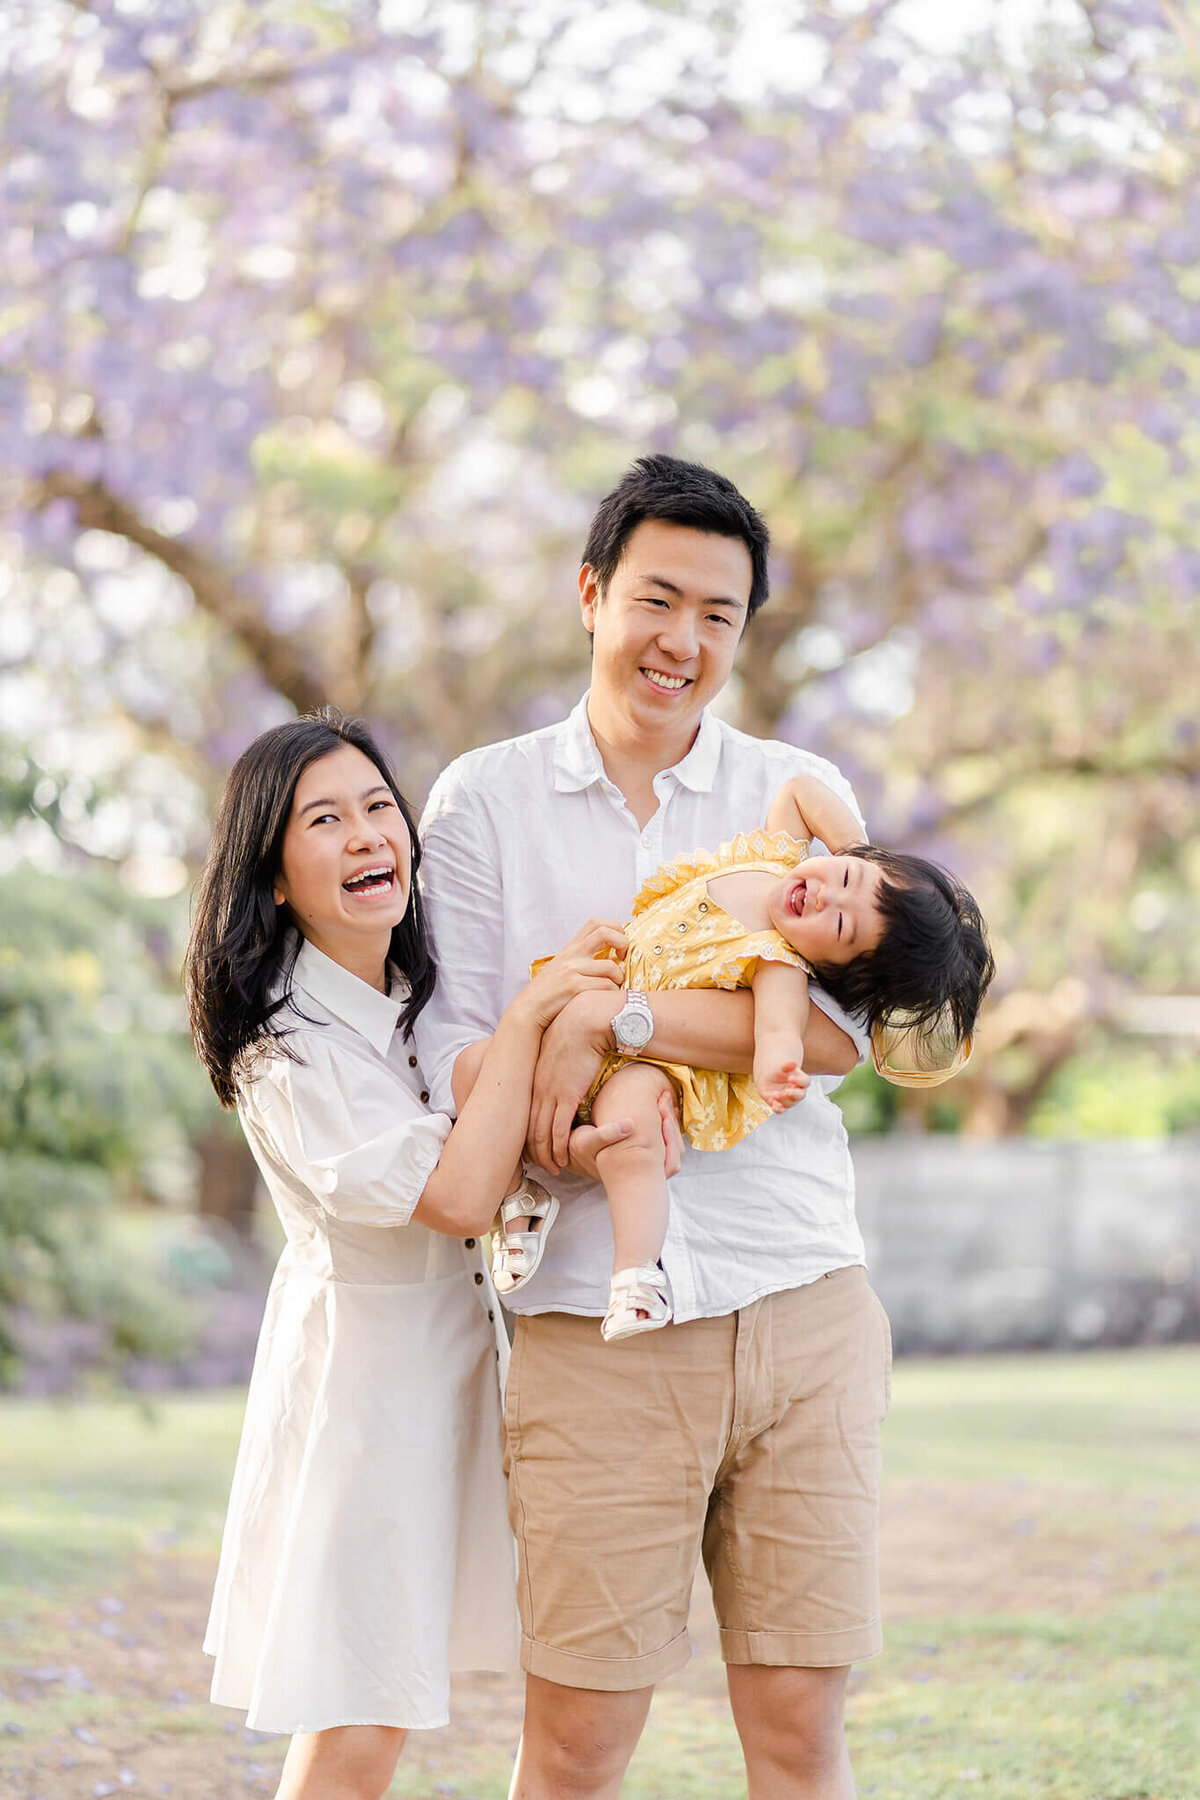 family photos filled with joy conenction and laughter all natural light in brisbane australia